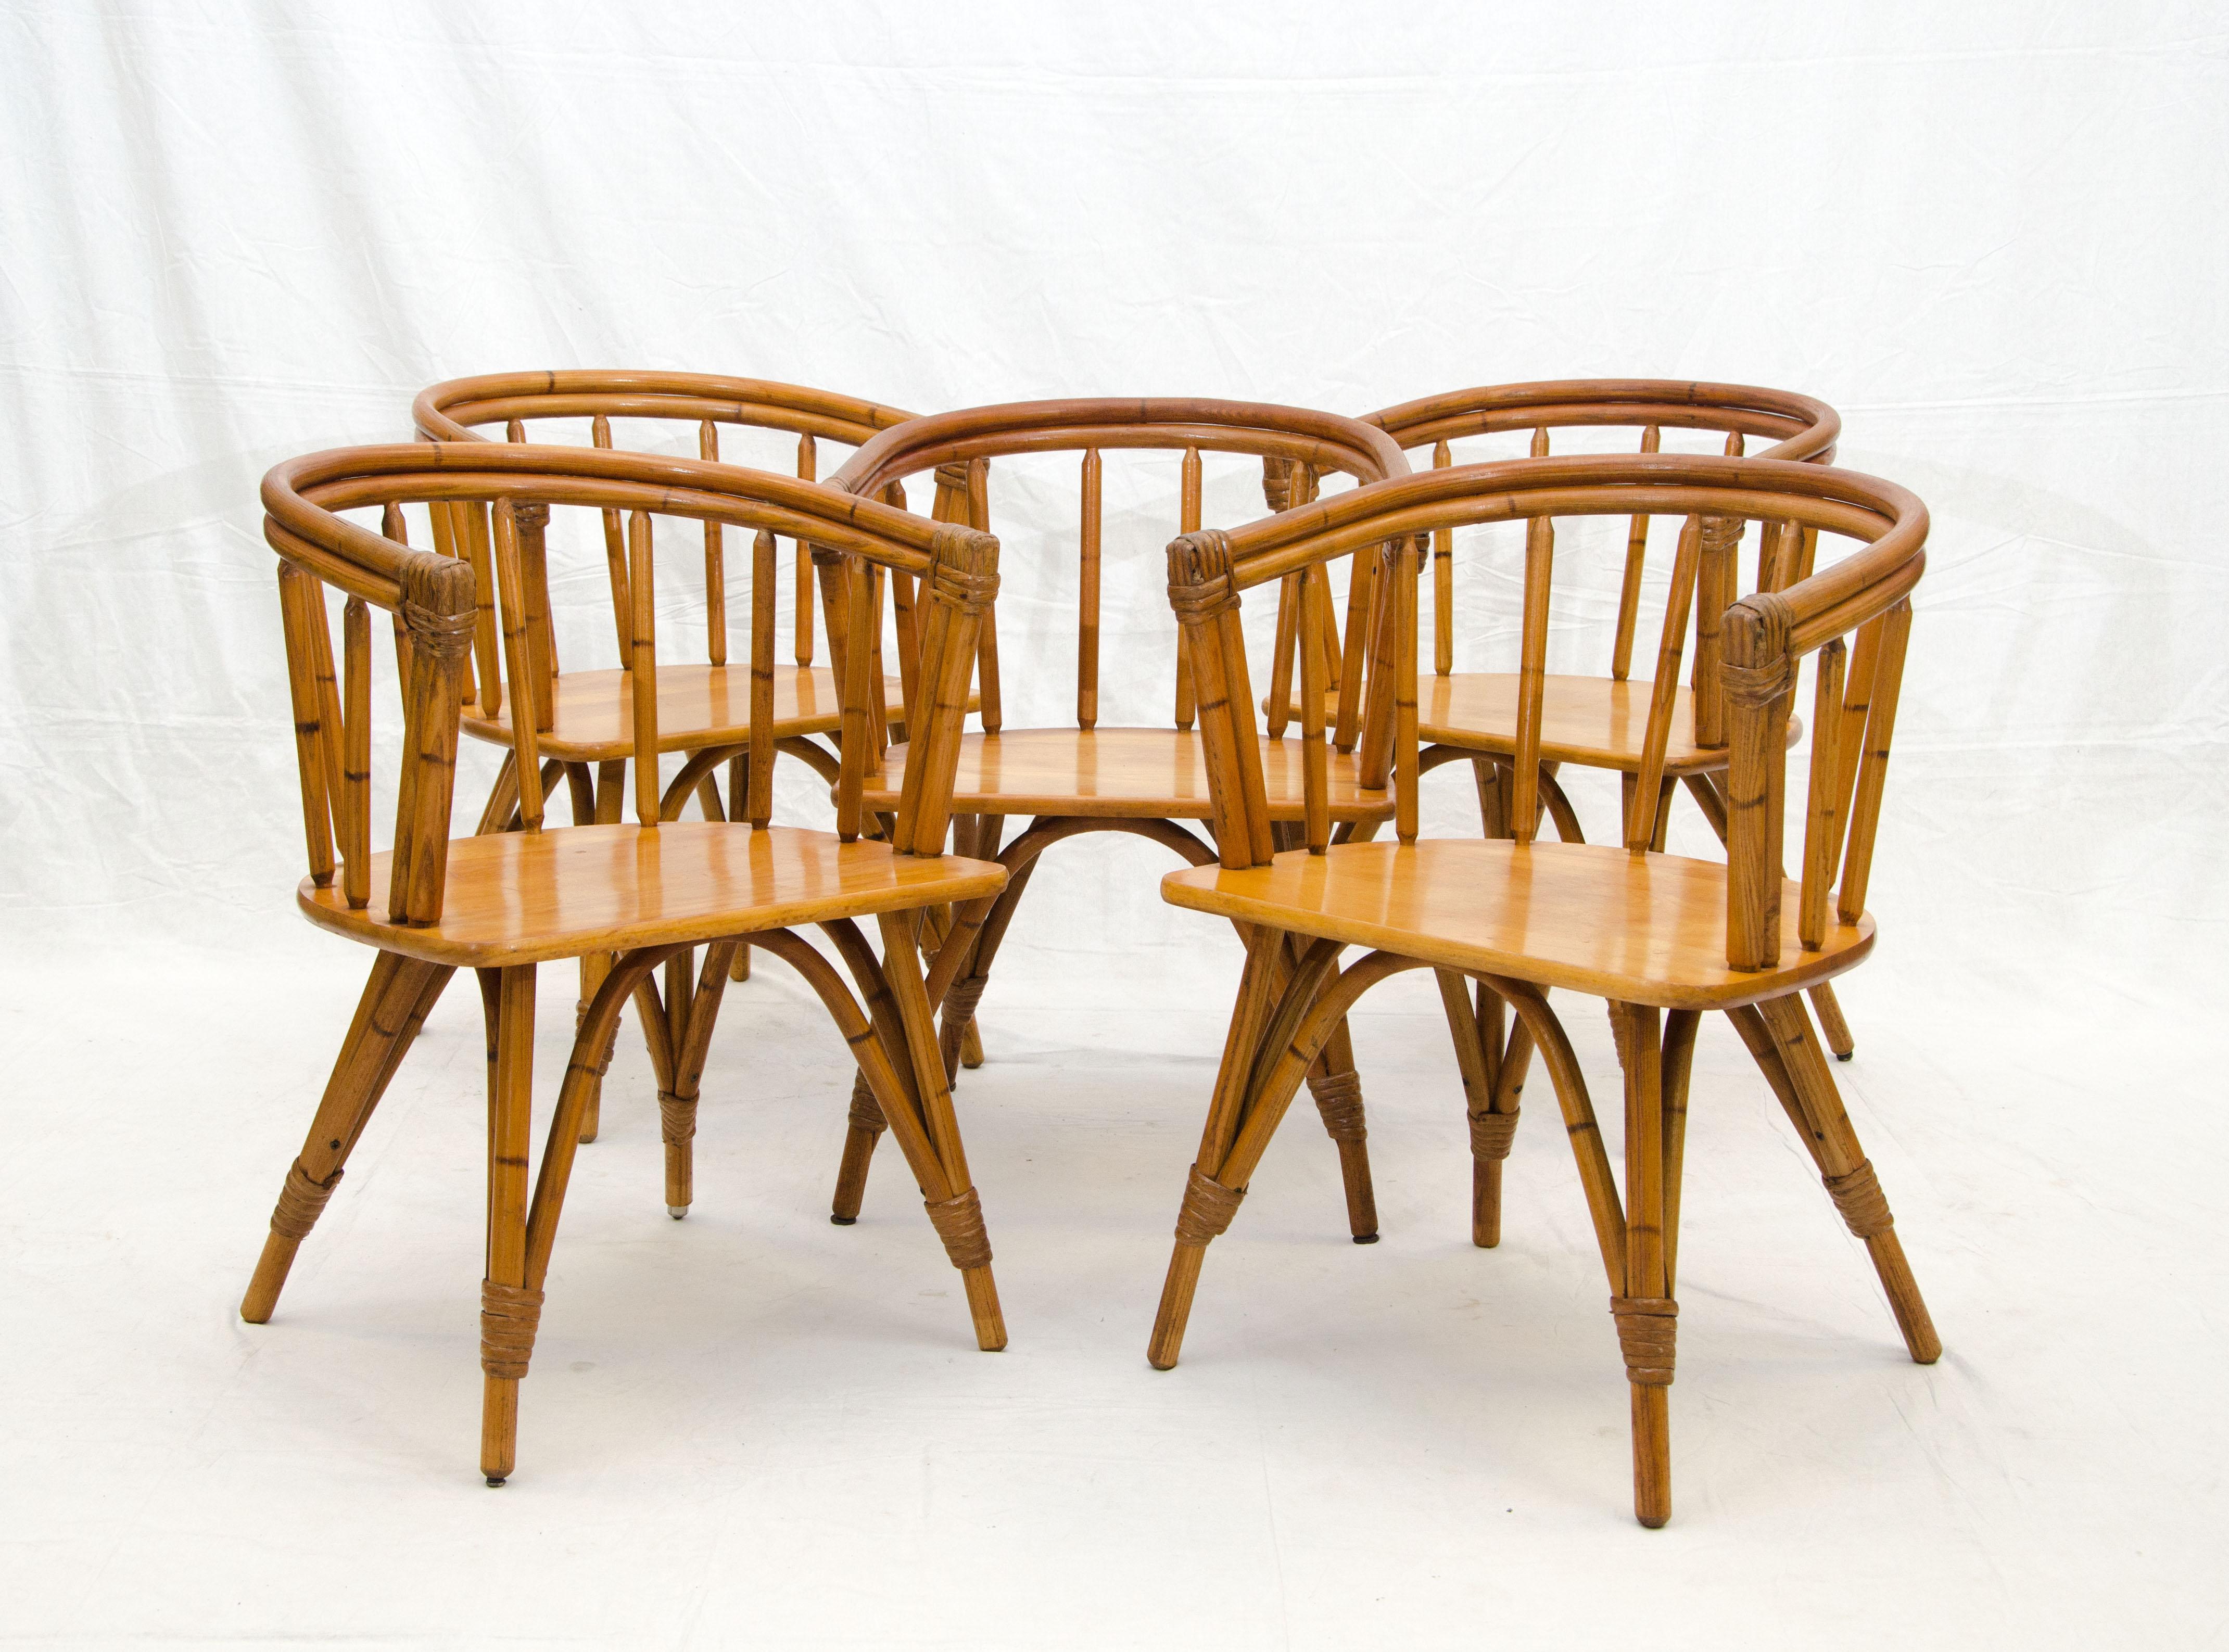 Set of five Heywood Wakefield captains chairs from their Ashcraft line which was made to look like the legs and backs were rattan, with paper cord wrapping at the fronts of the arms as well as the legs. The wrappings were decorative accents. These